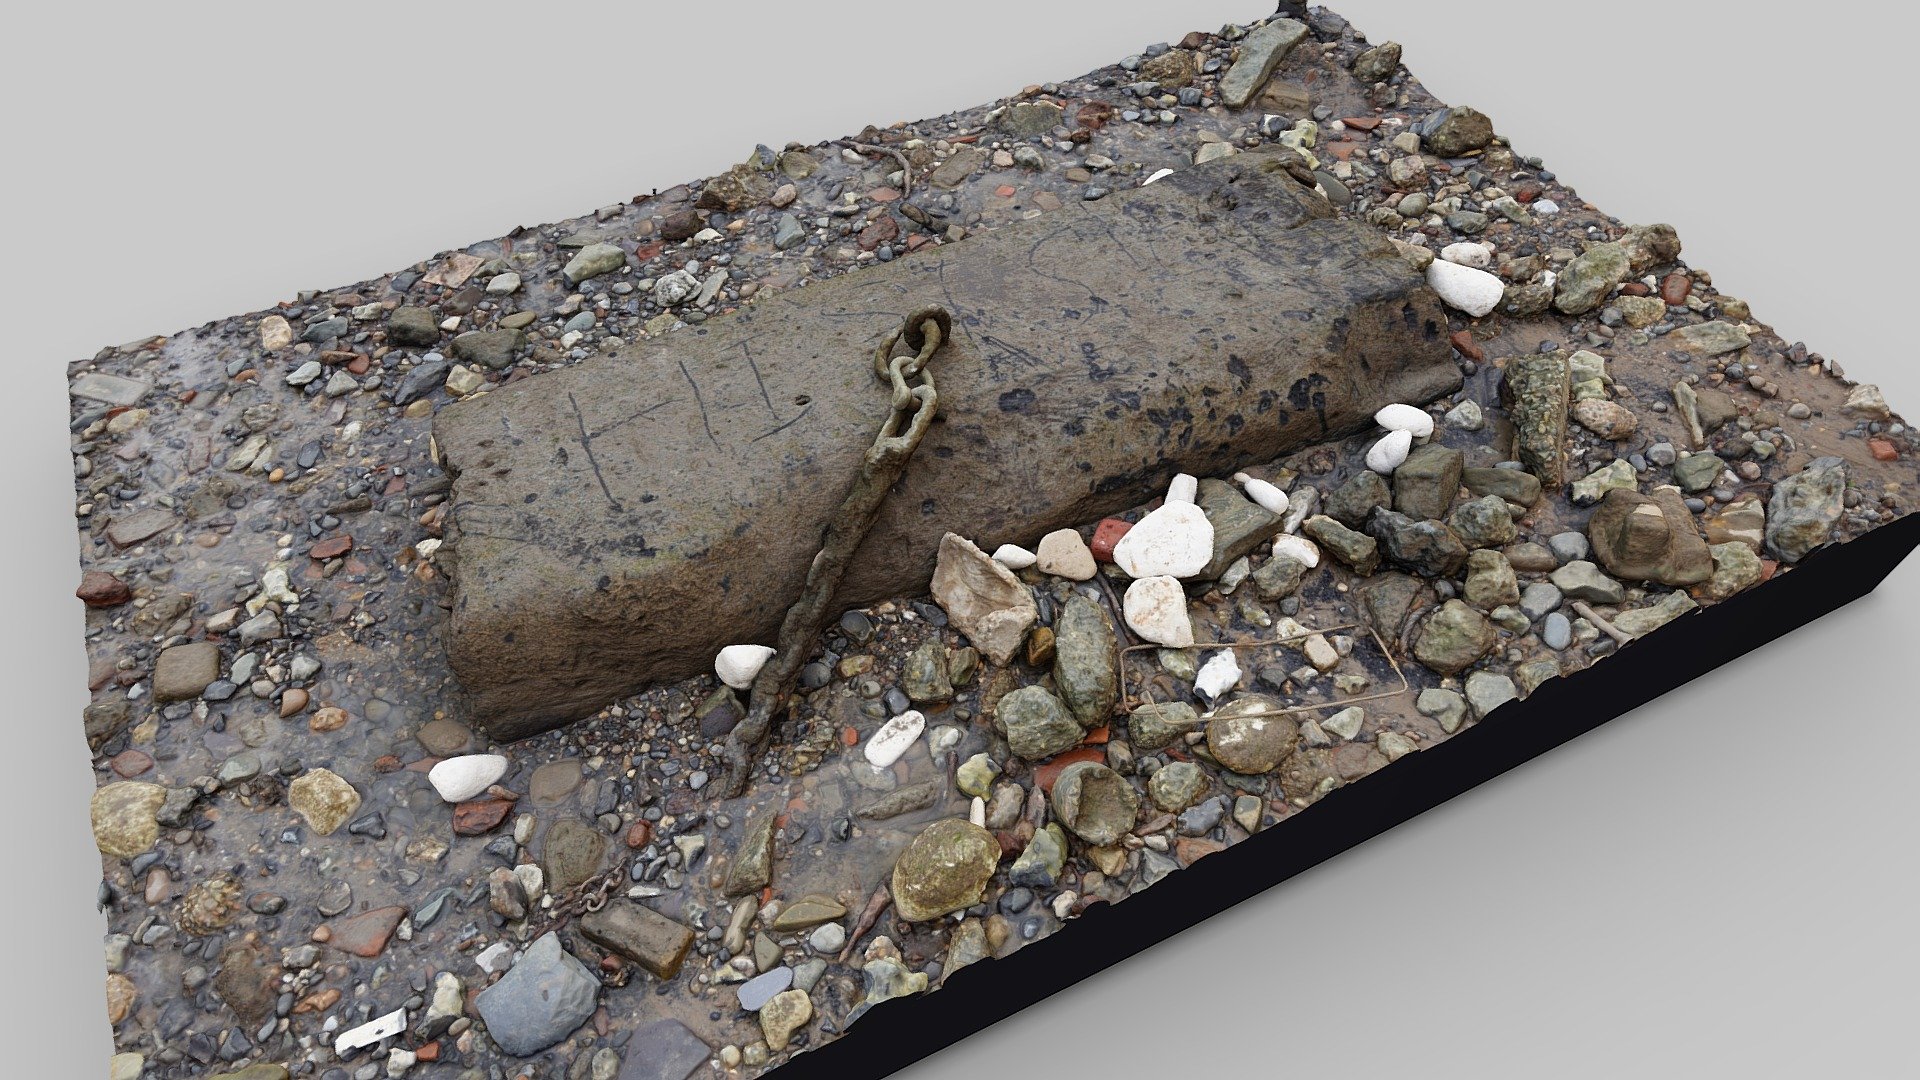 A large timber reused as a mooring feature on the Thames foreshore below New Crane Stairs (at the turn in Wapping High Street where it heads north to Garnet Street), London.

New Crane Stairs can be seen here: https://sketchfab.com/3d-models/new-crane-stairs-7accb9f414c94c39a63fd253e7b8619a

222 photos taken in January 2022 with a Sony a7R III and processed in Reality Capture 3d model